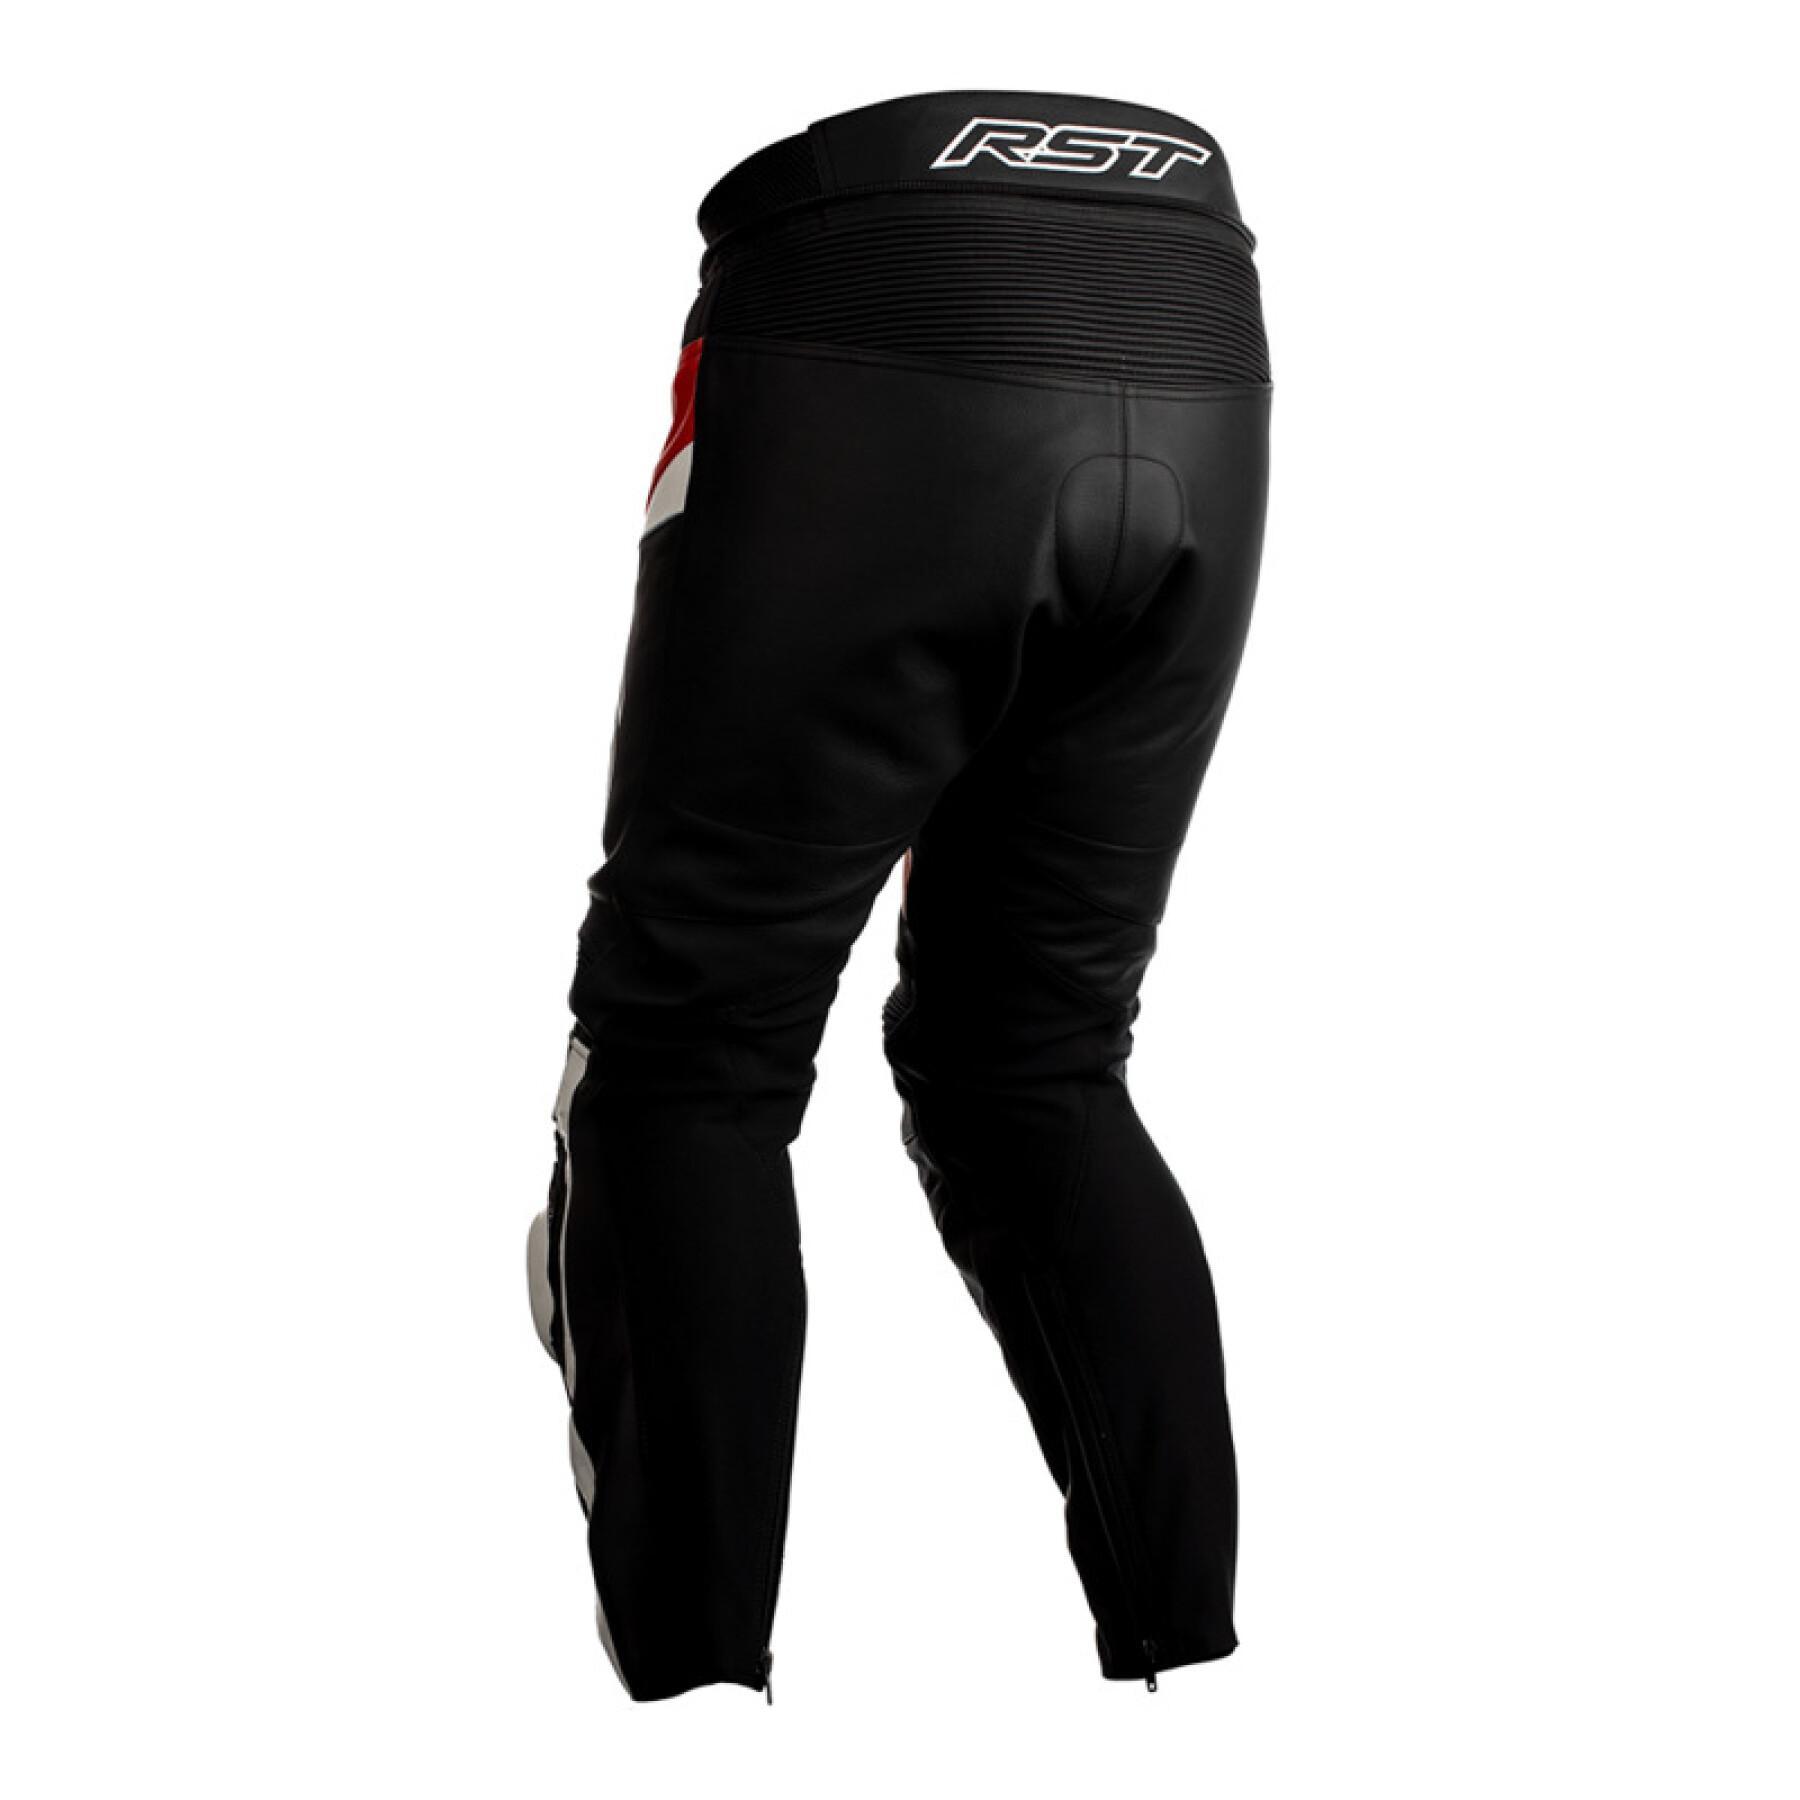 Motorcycle leather pants RST Tractech Evo 4 CE